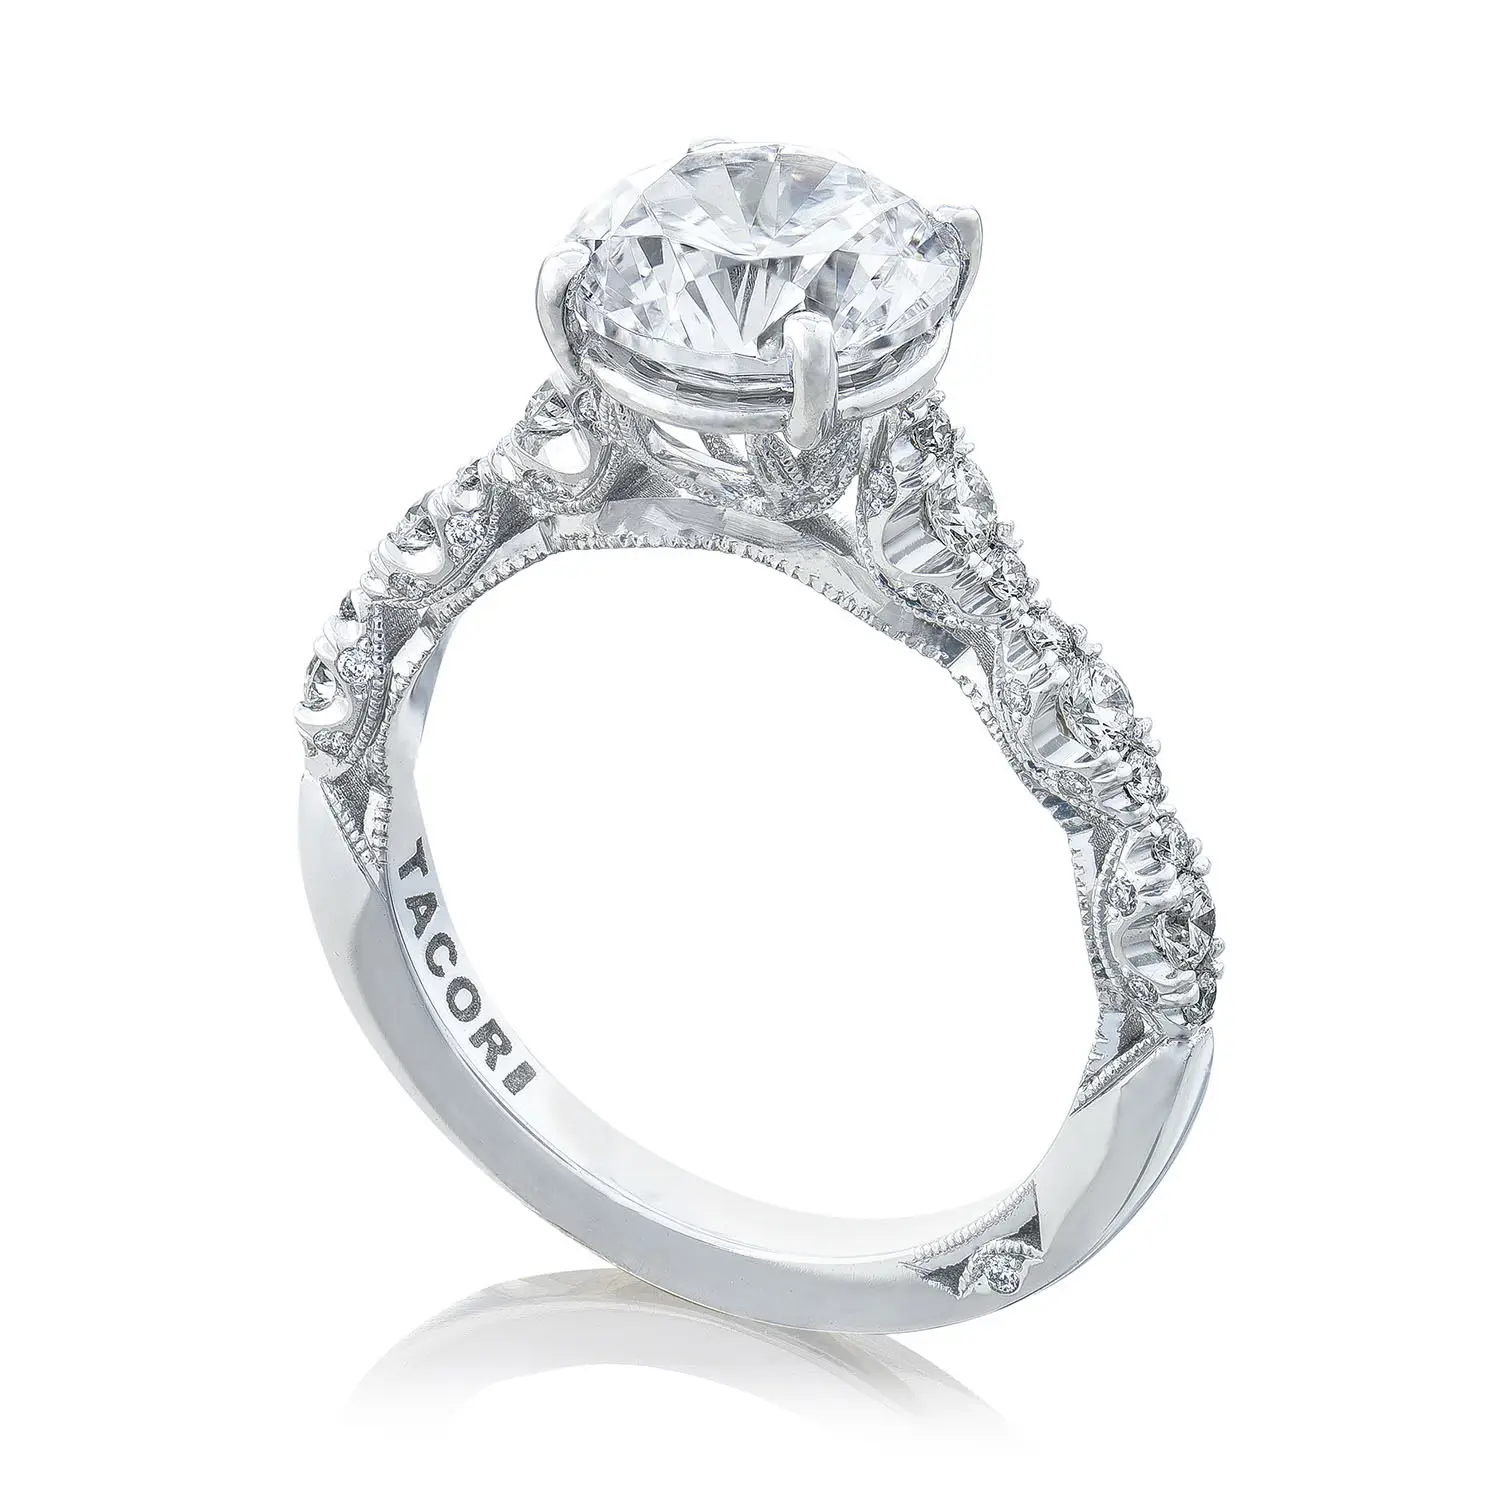 Petite Crescent Engagement Ring Mounting in White Gold by Tacori